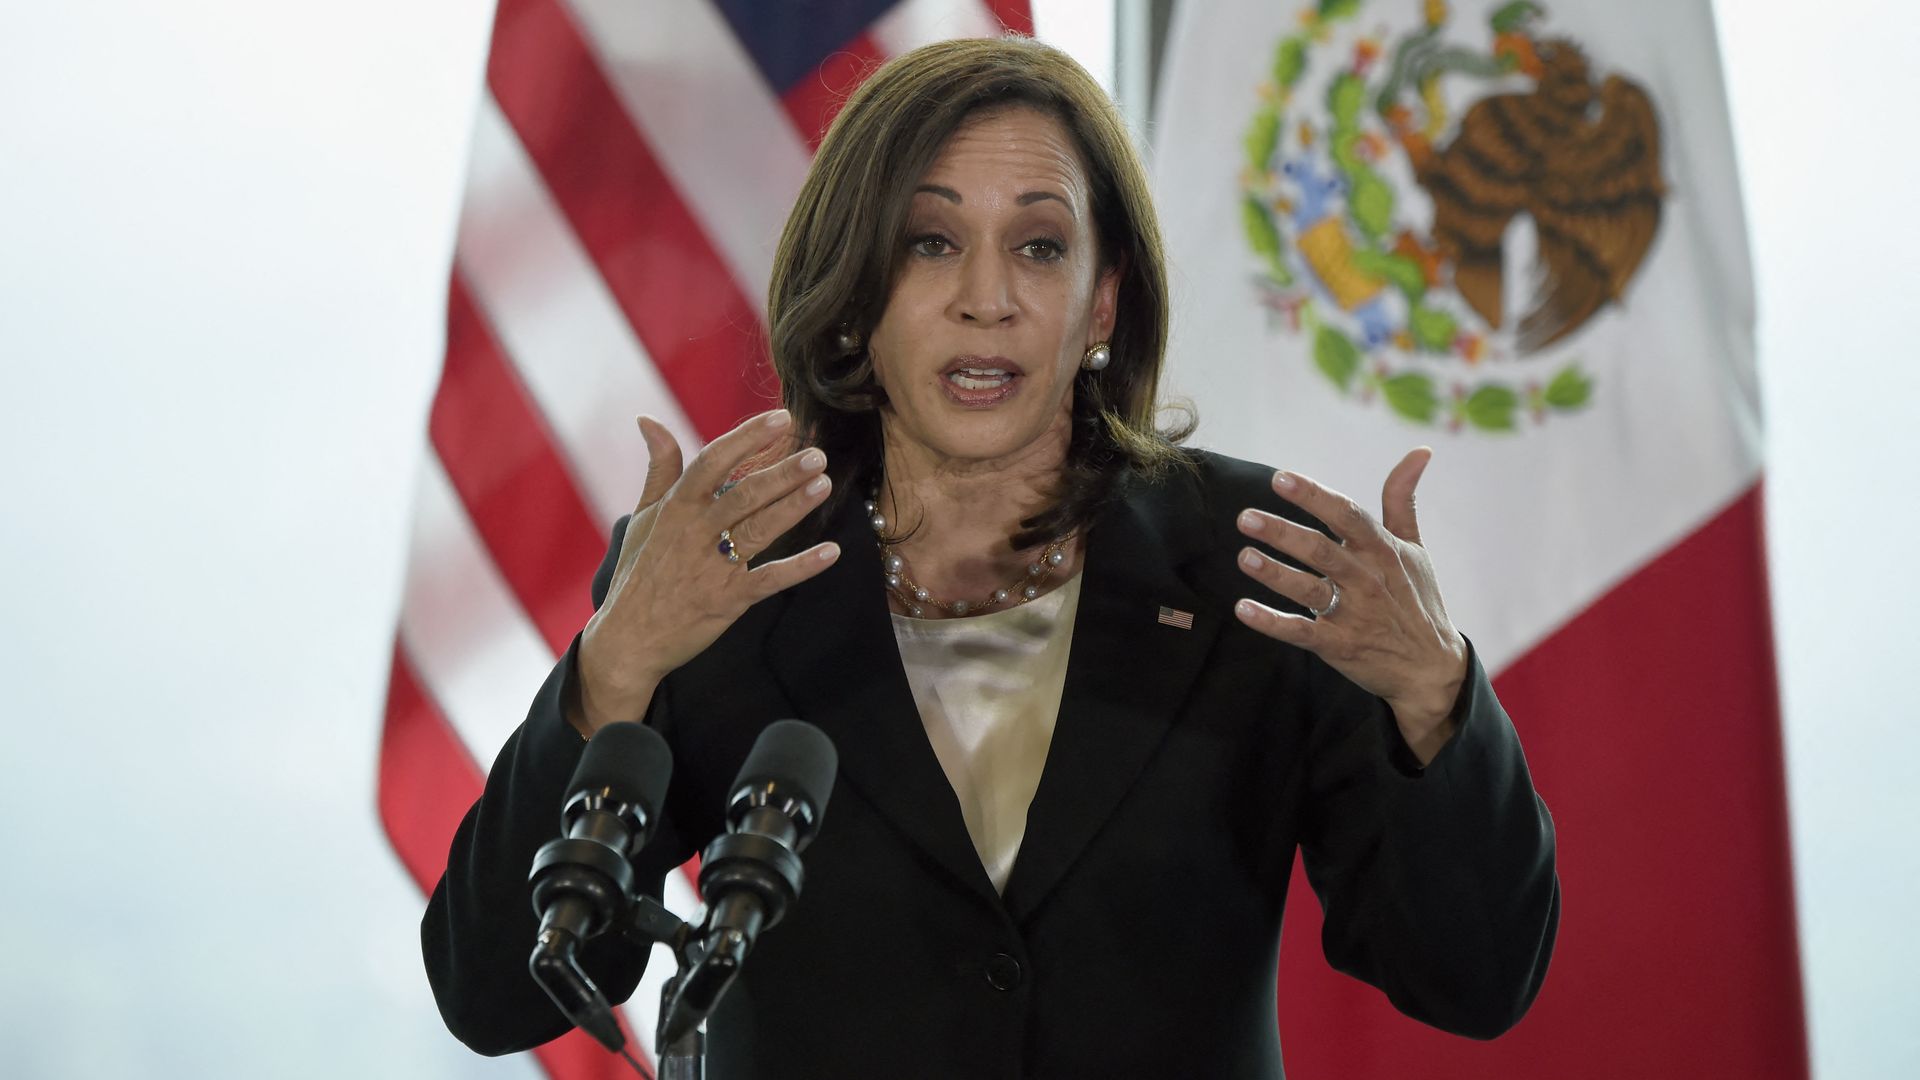 Vice President Kamala Harris is seen speaking during a news conference today in Mexico City.